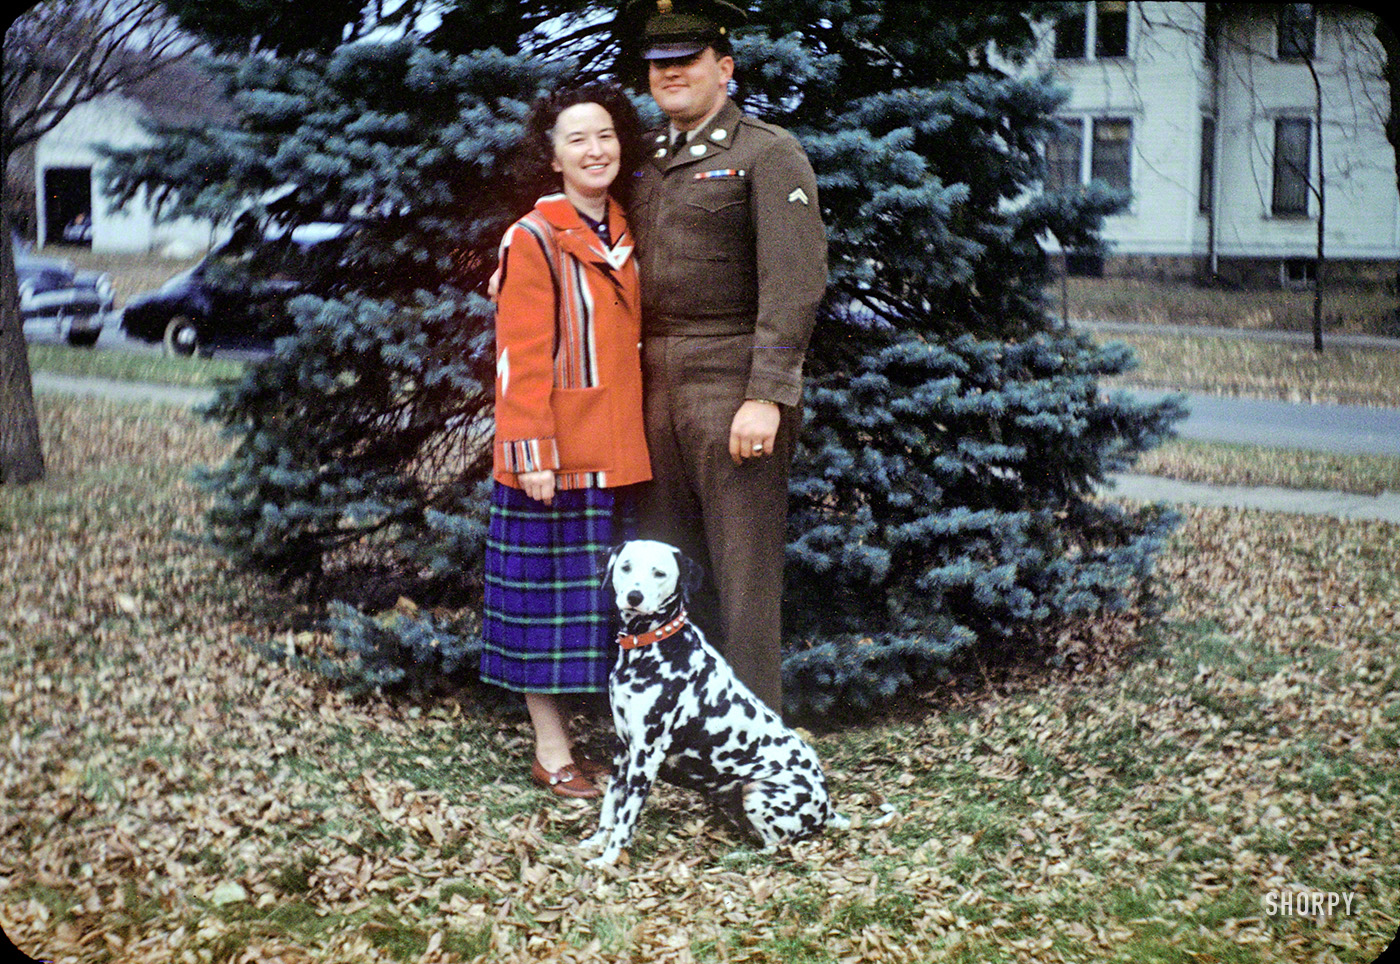 "Grace & Donald -- 11 Nov. 1951." Grace Tuttle and her soldier son Donald Cartwright (along with her Dalmatian, Sally) exactly 64 years ago in Blue Earth, Minnesota. 35mm Kodachrome by Hubert Tuttle. View full size.